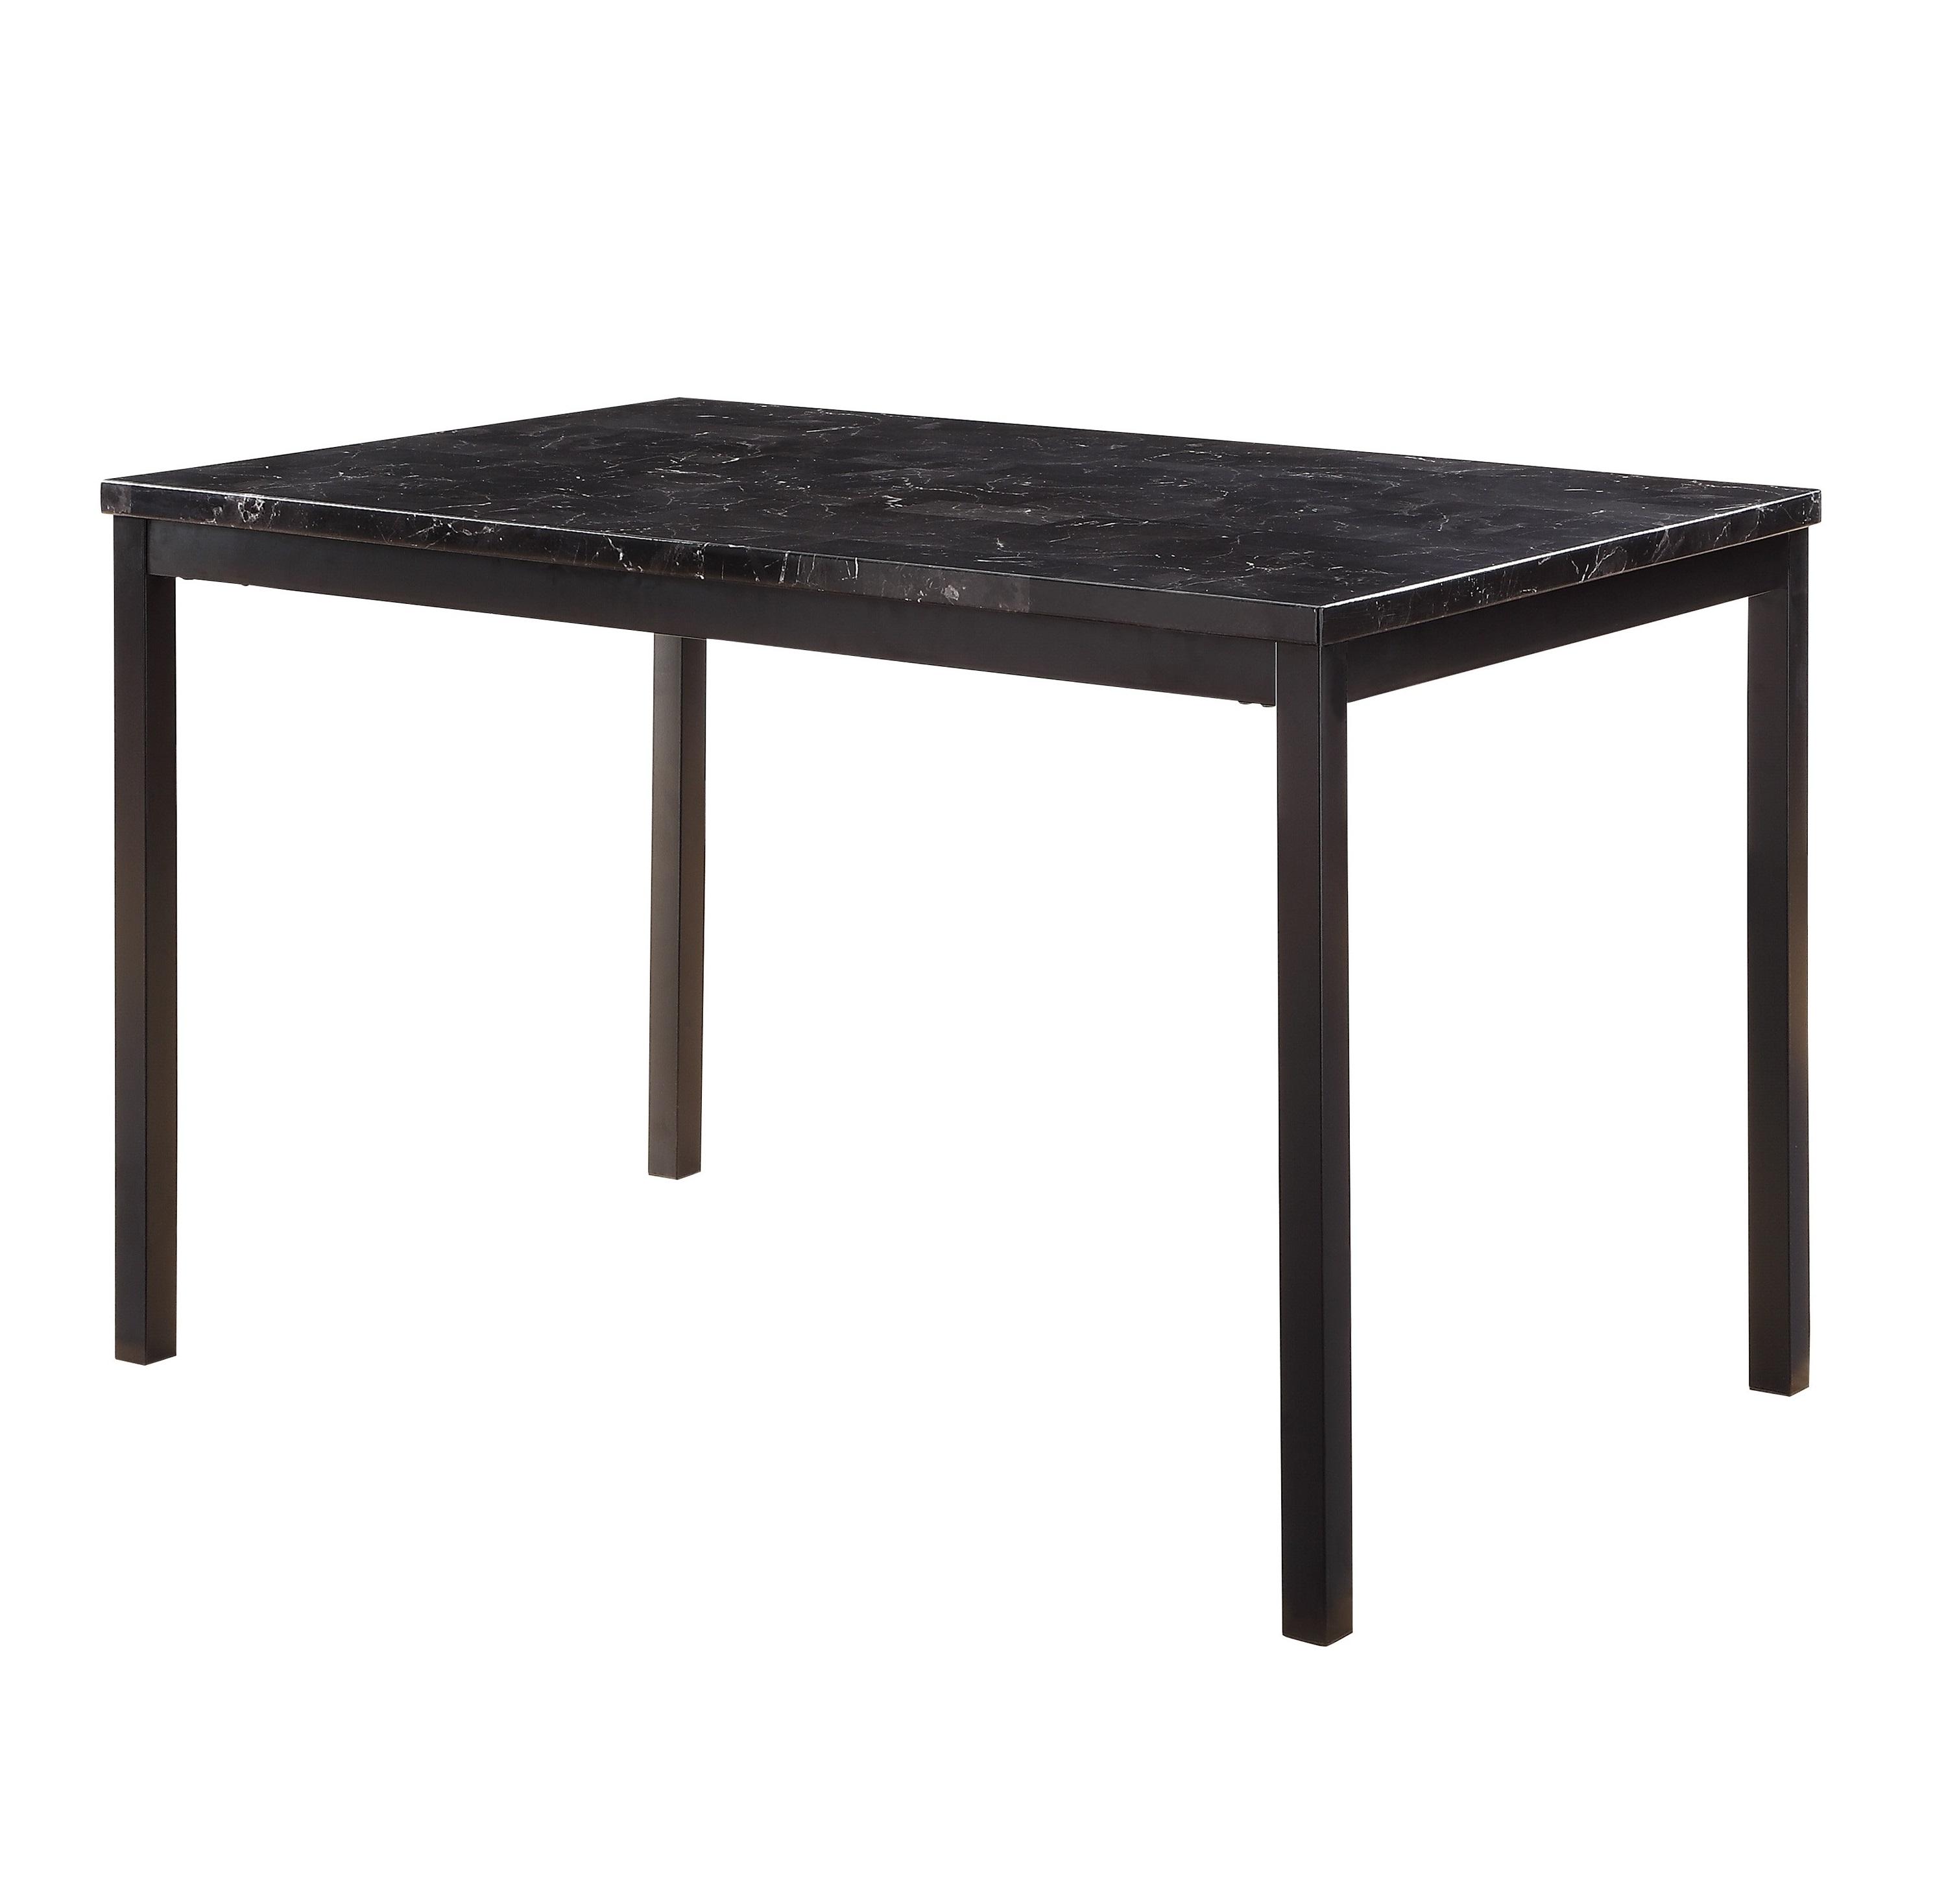 Transitional Dining Table 2601BK-48 Tempe 2601BK-48 in Black 